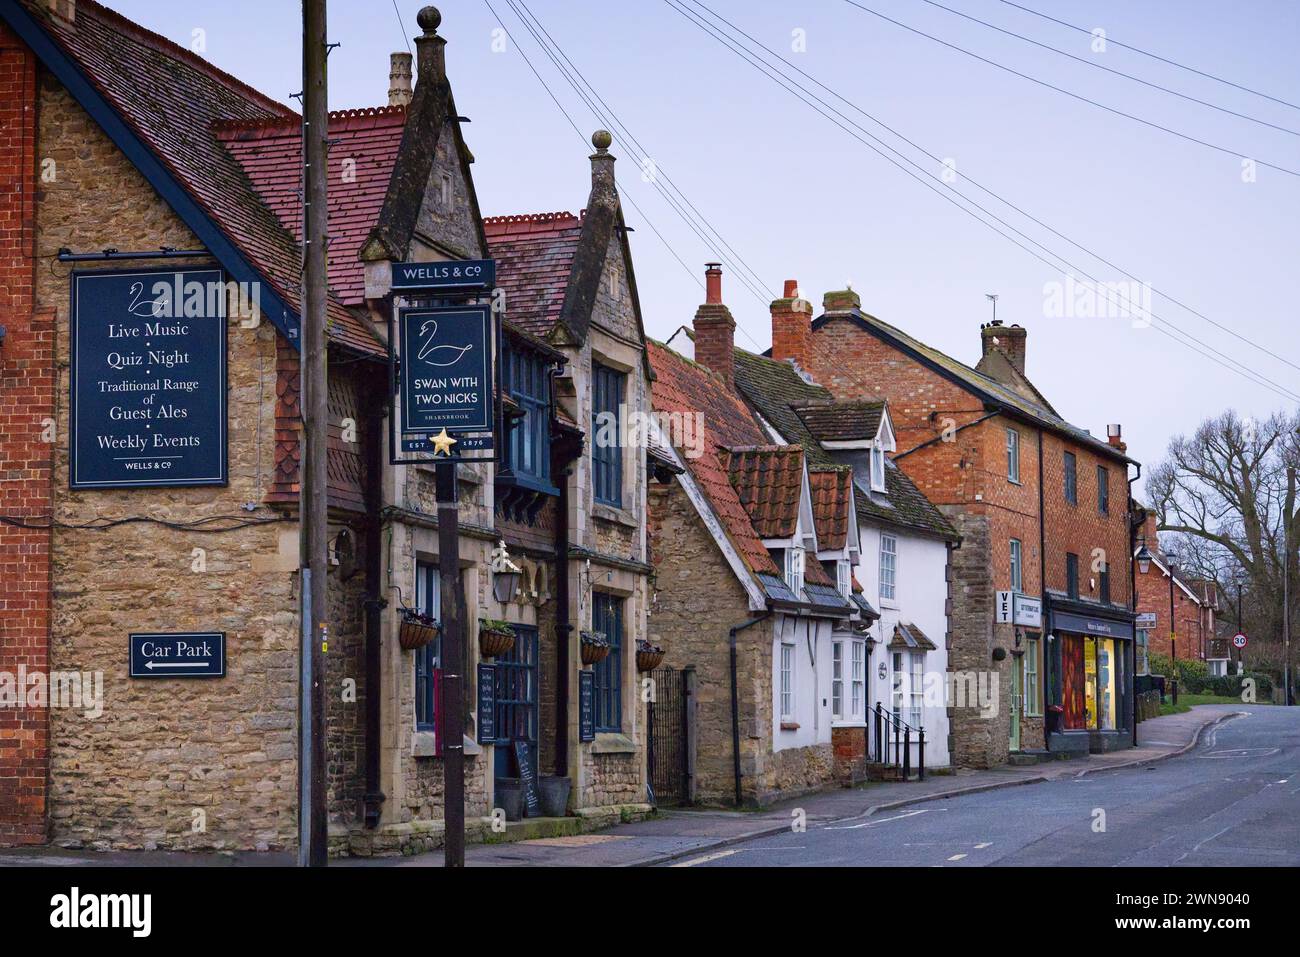 Sharnbrook, Bedfordshire, England, UK - Co-op shop, veterinary clinic, Swan pub and cottages in the village high street on a sunny morning Stock Photo